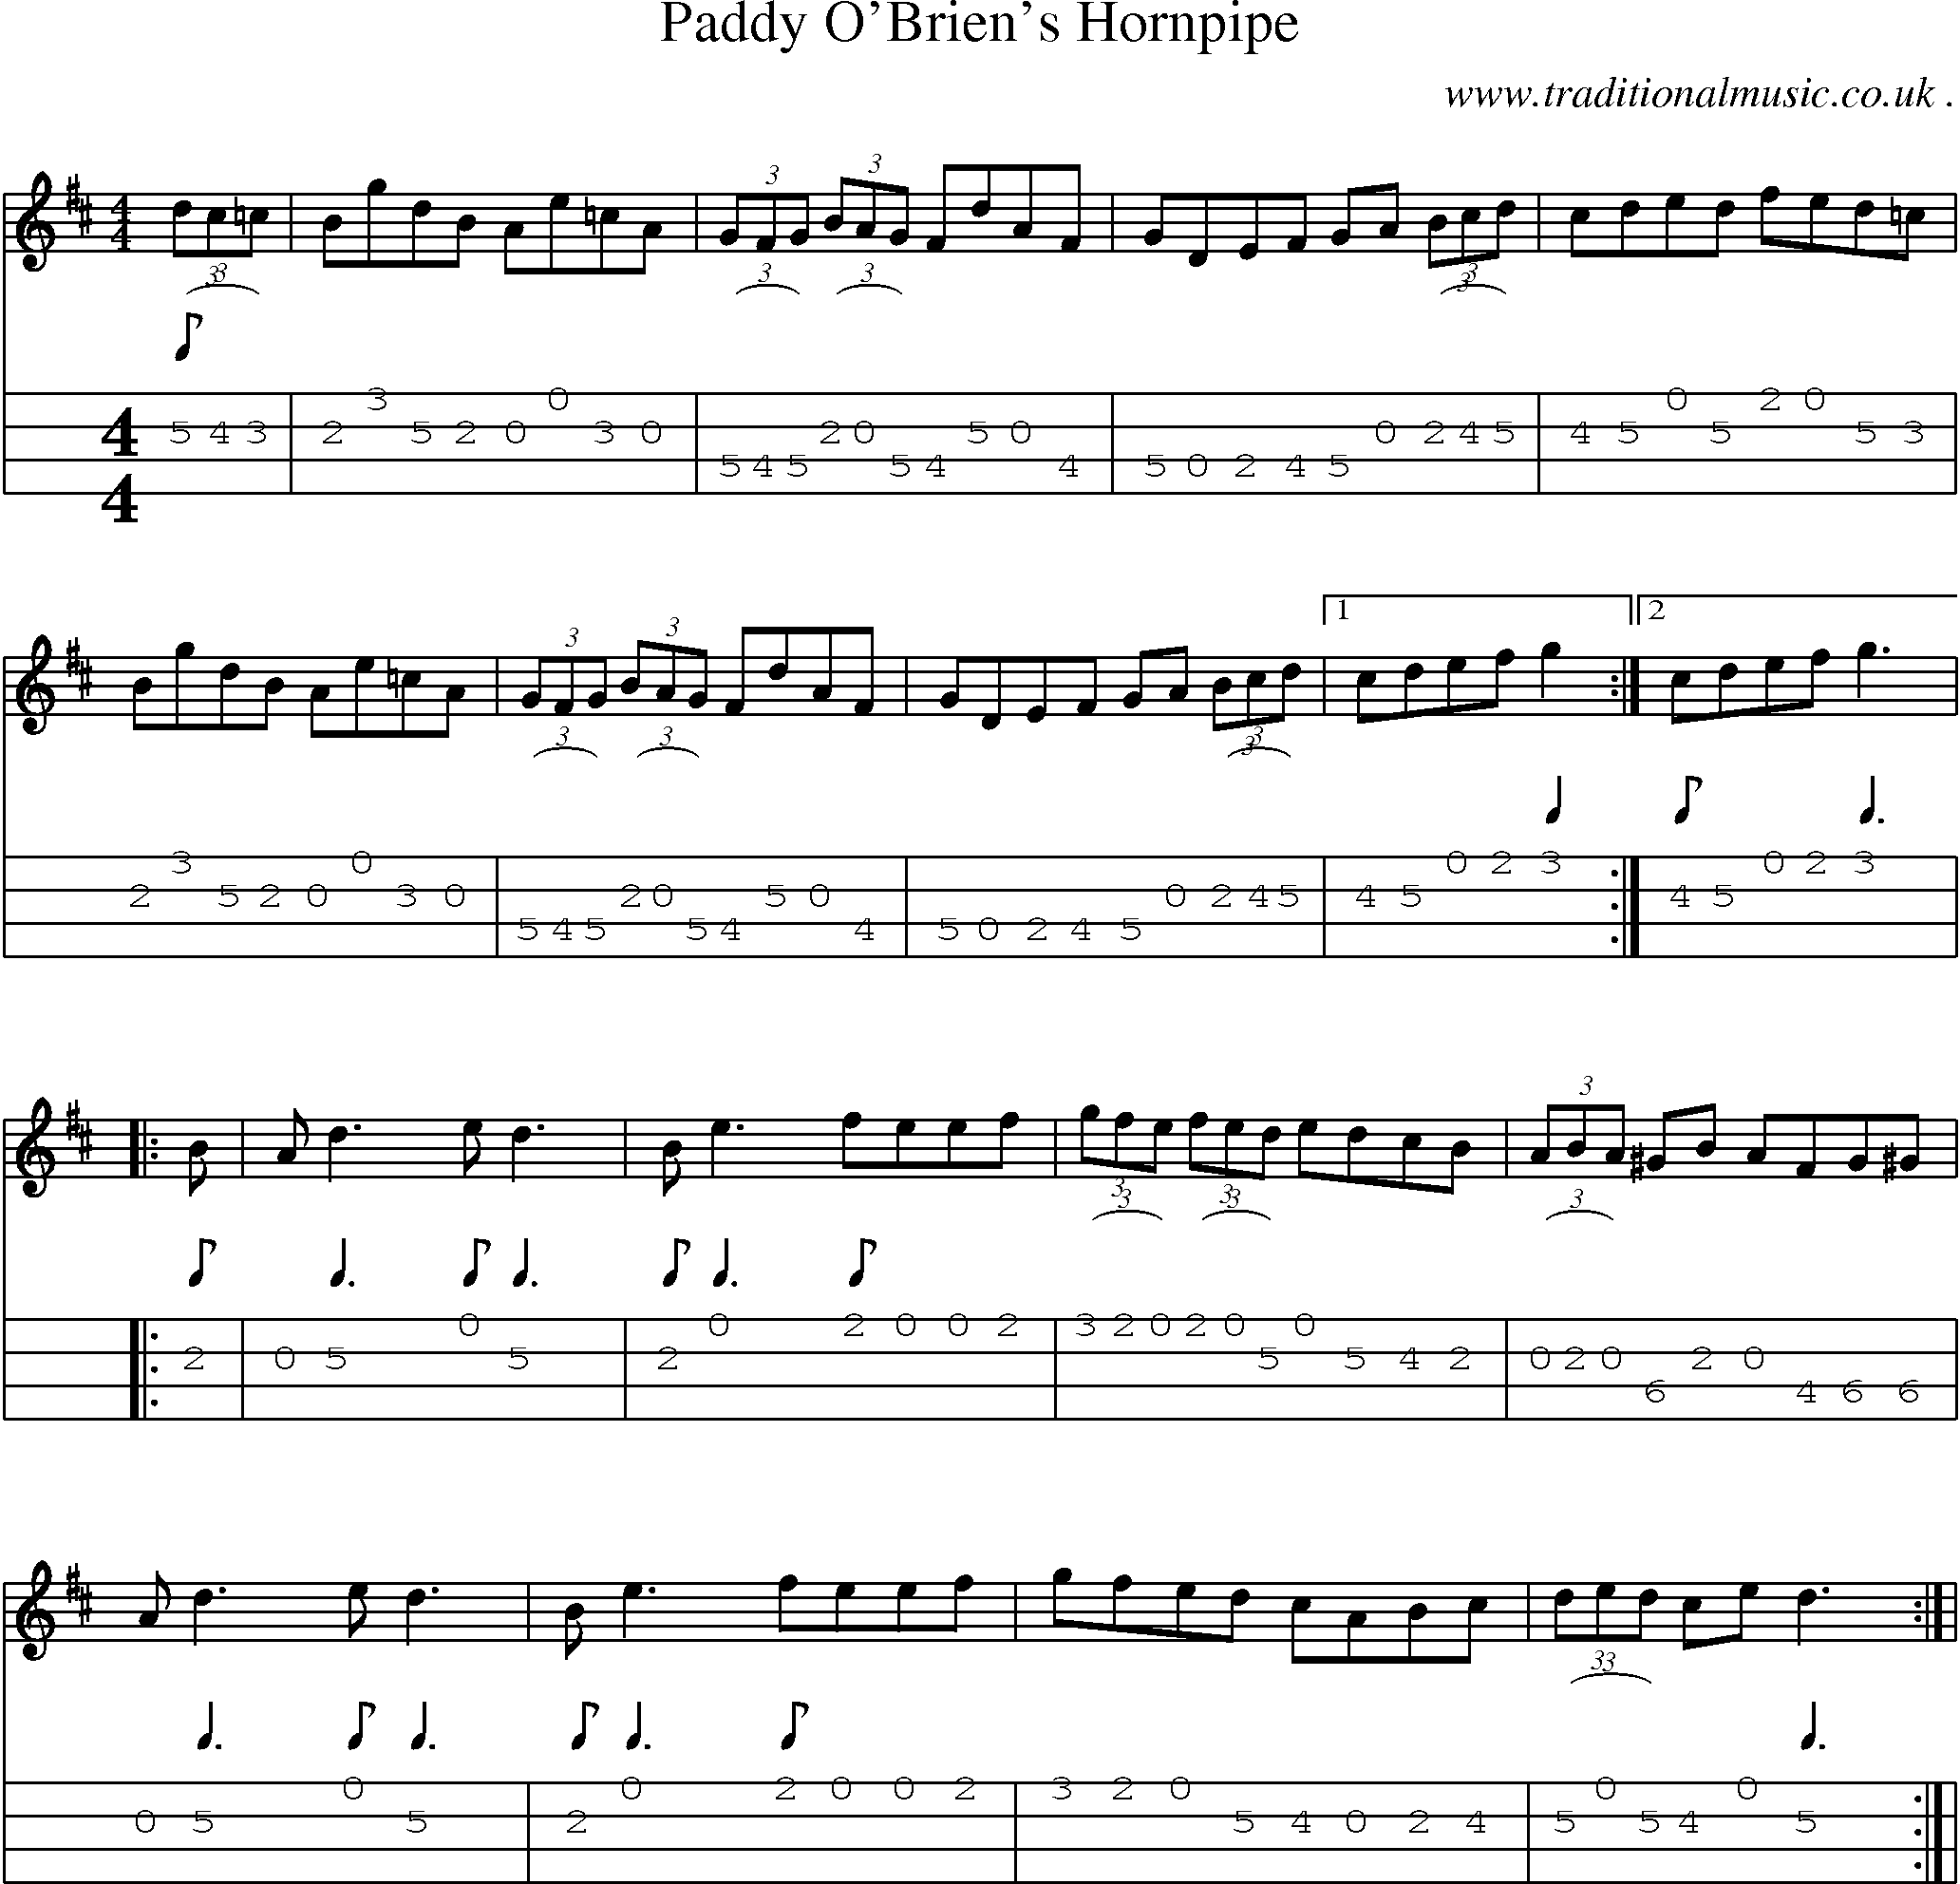 Sheet-Music and Mandolin Tabs for Paddy Obriens Hornpipe